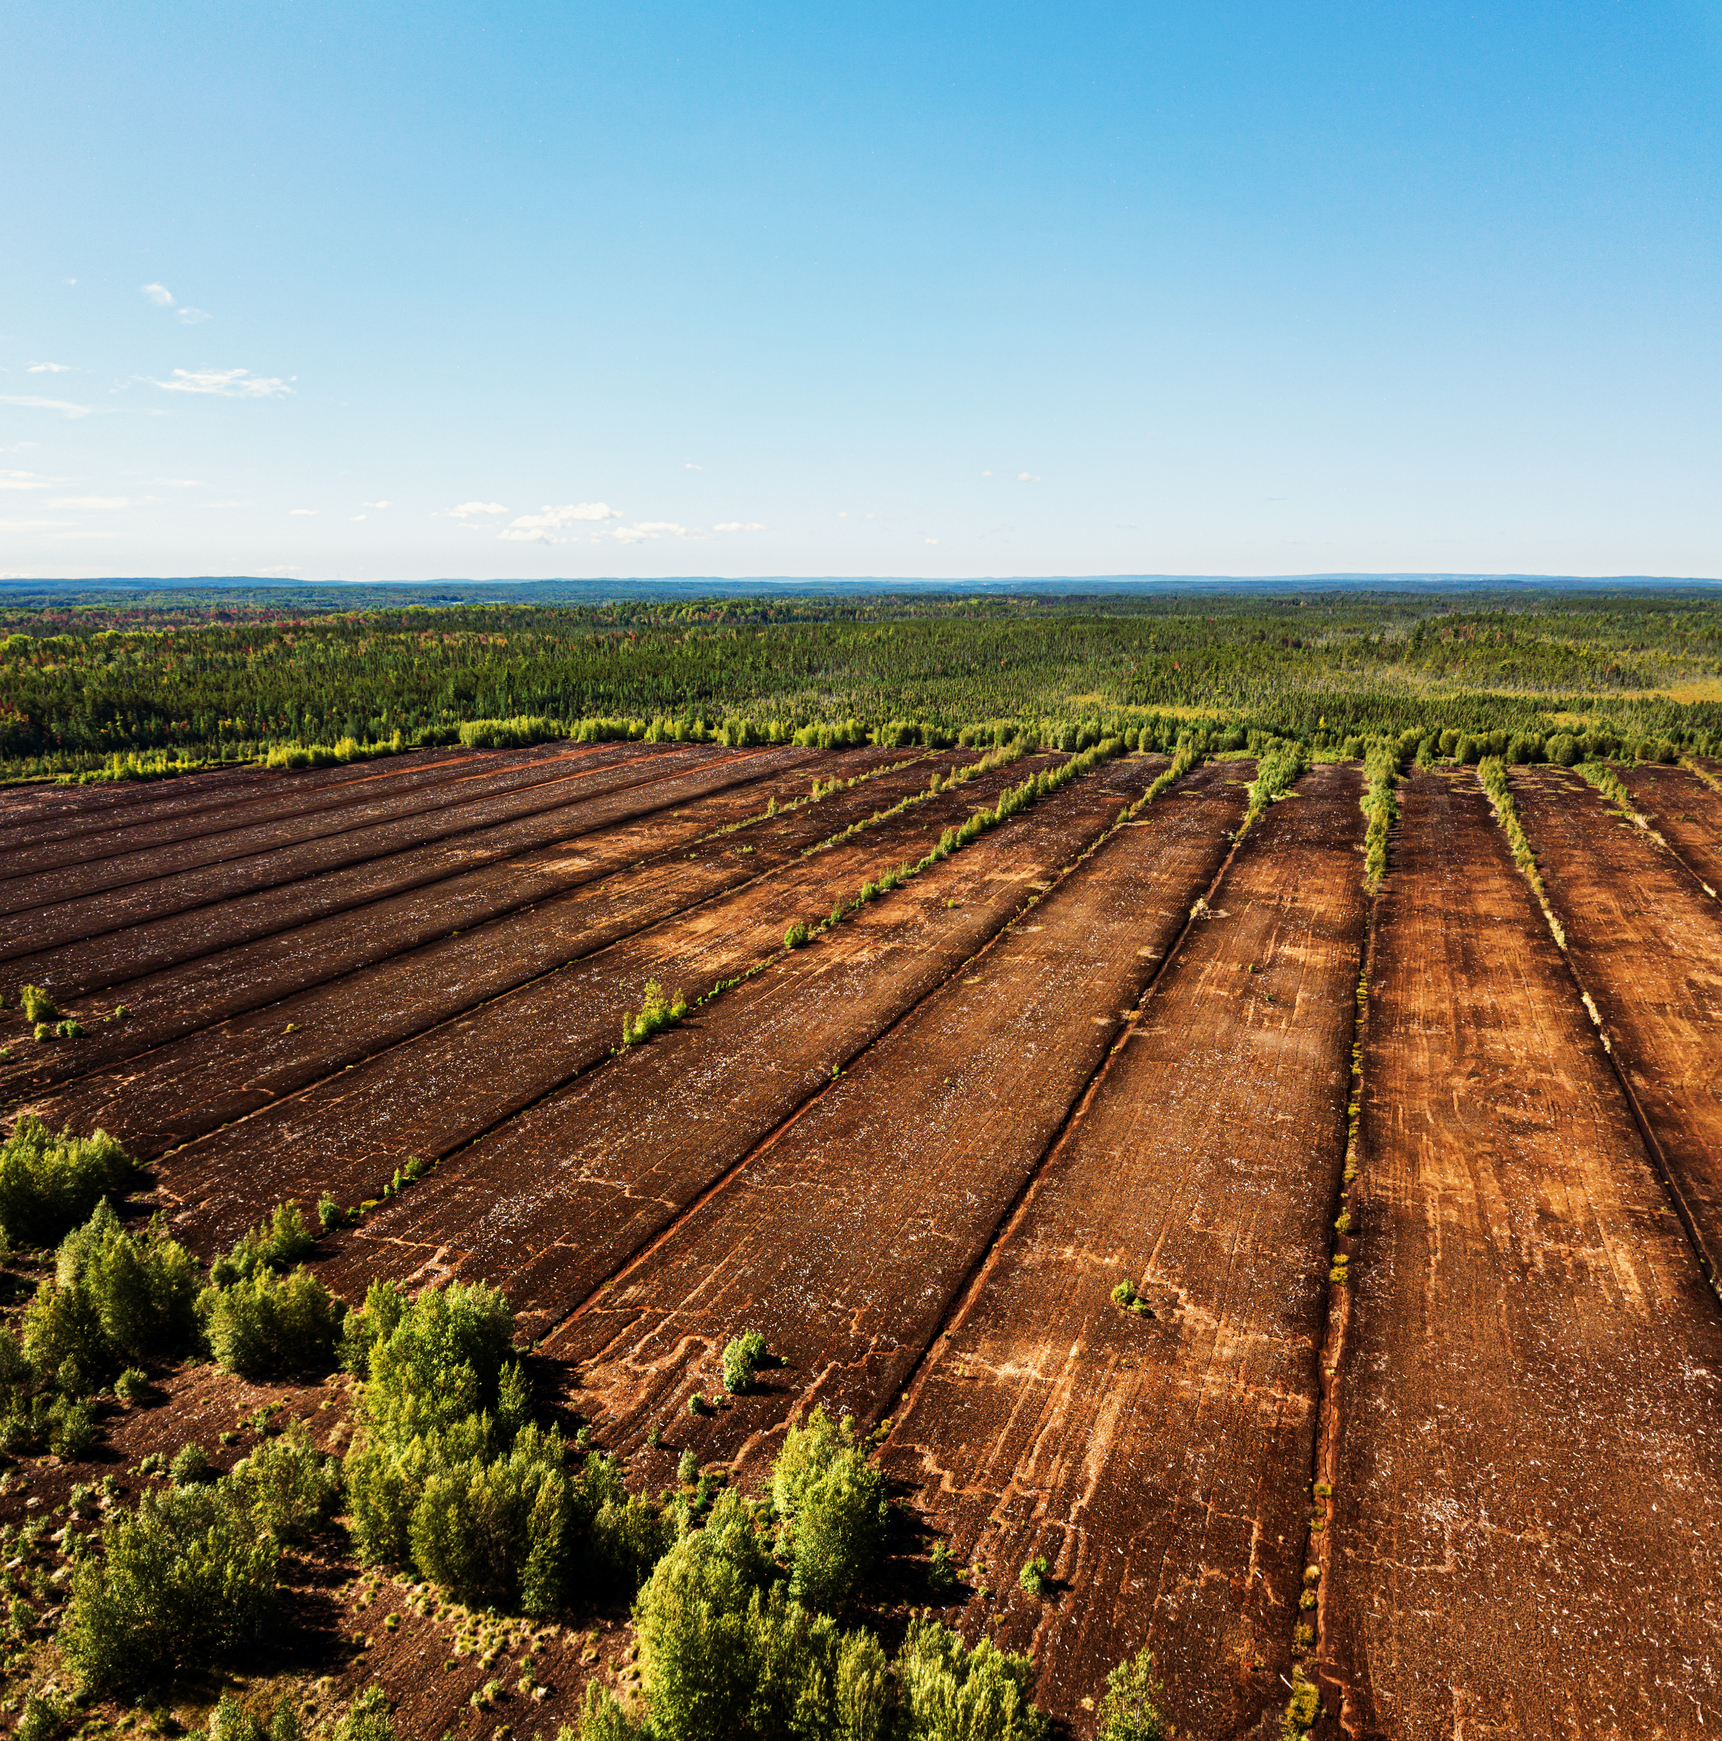 Peat farm shows large patch of barren soil with forest of trees in background